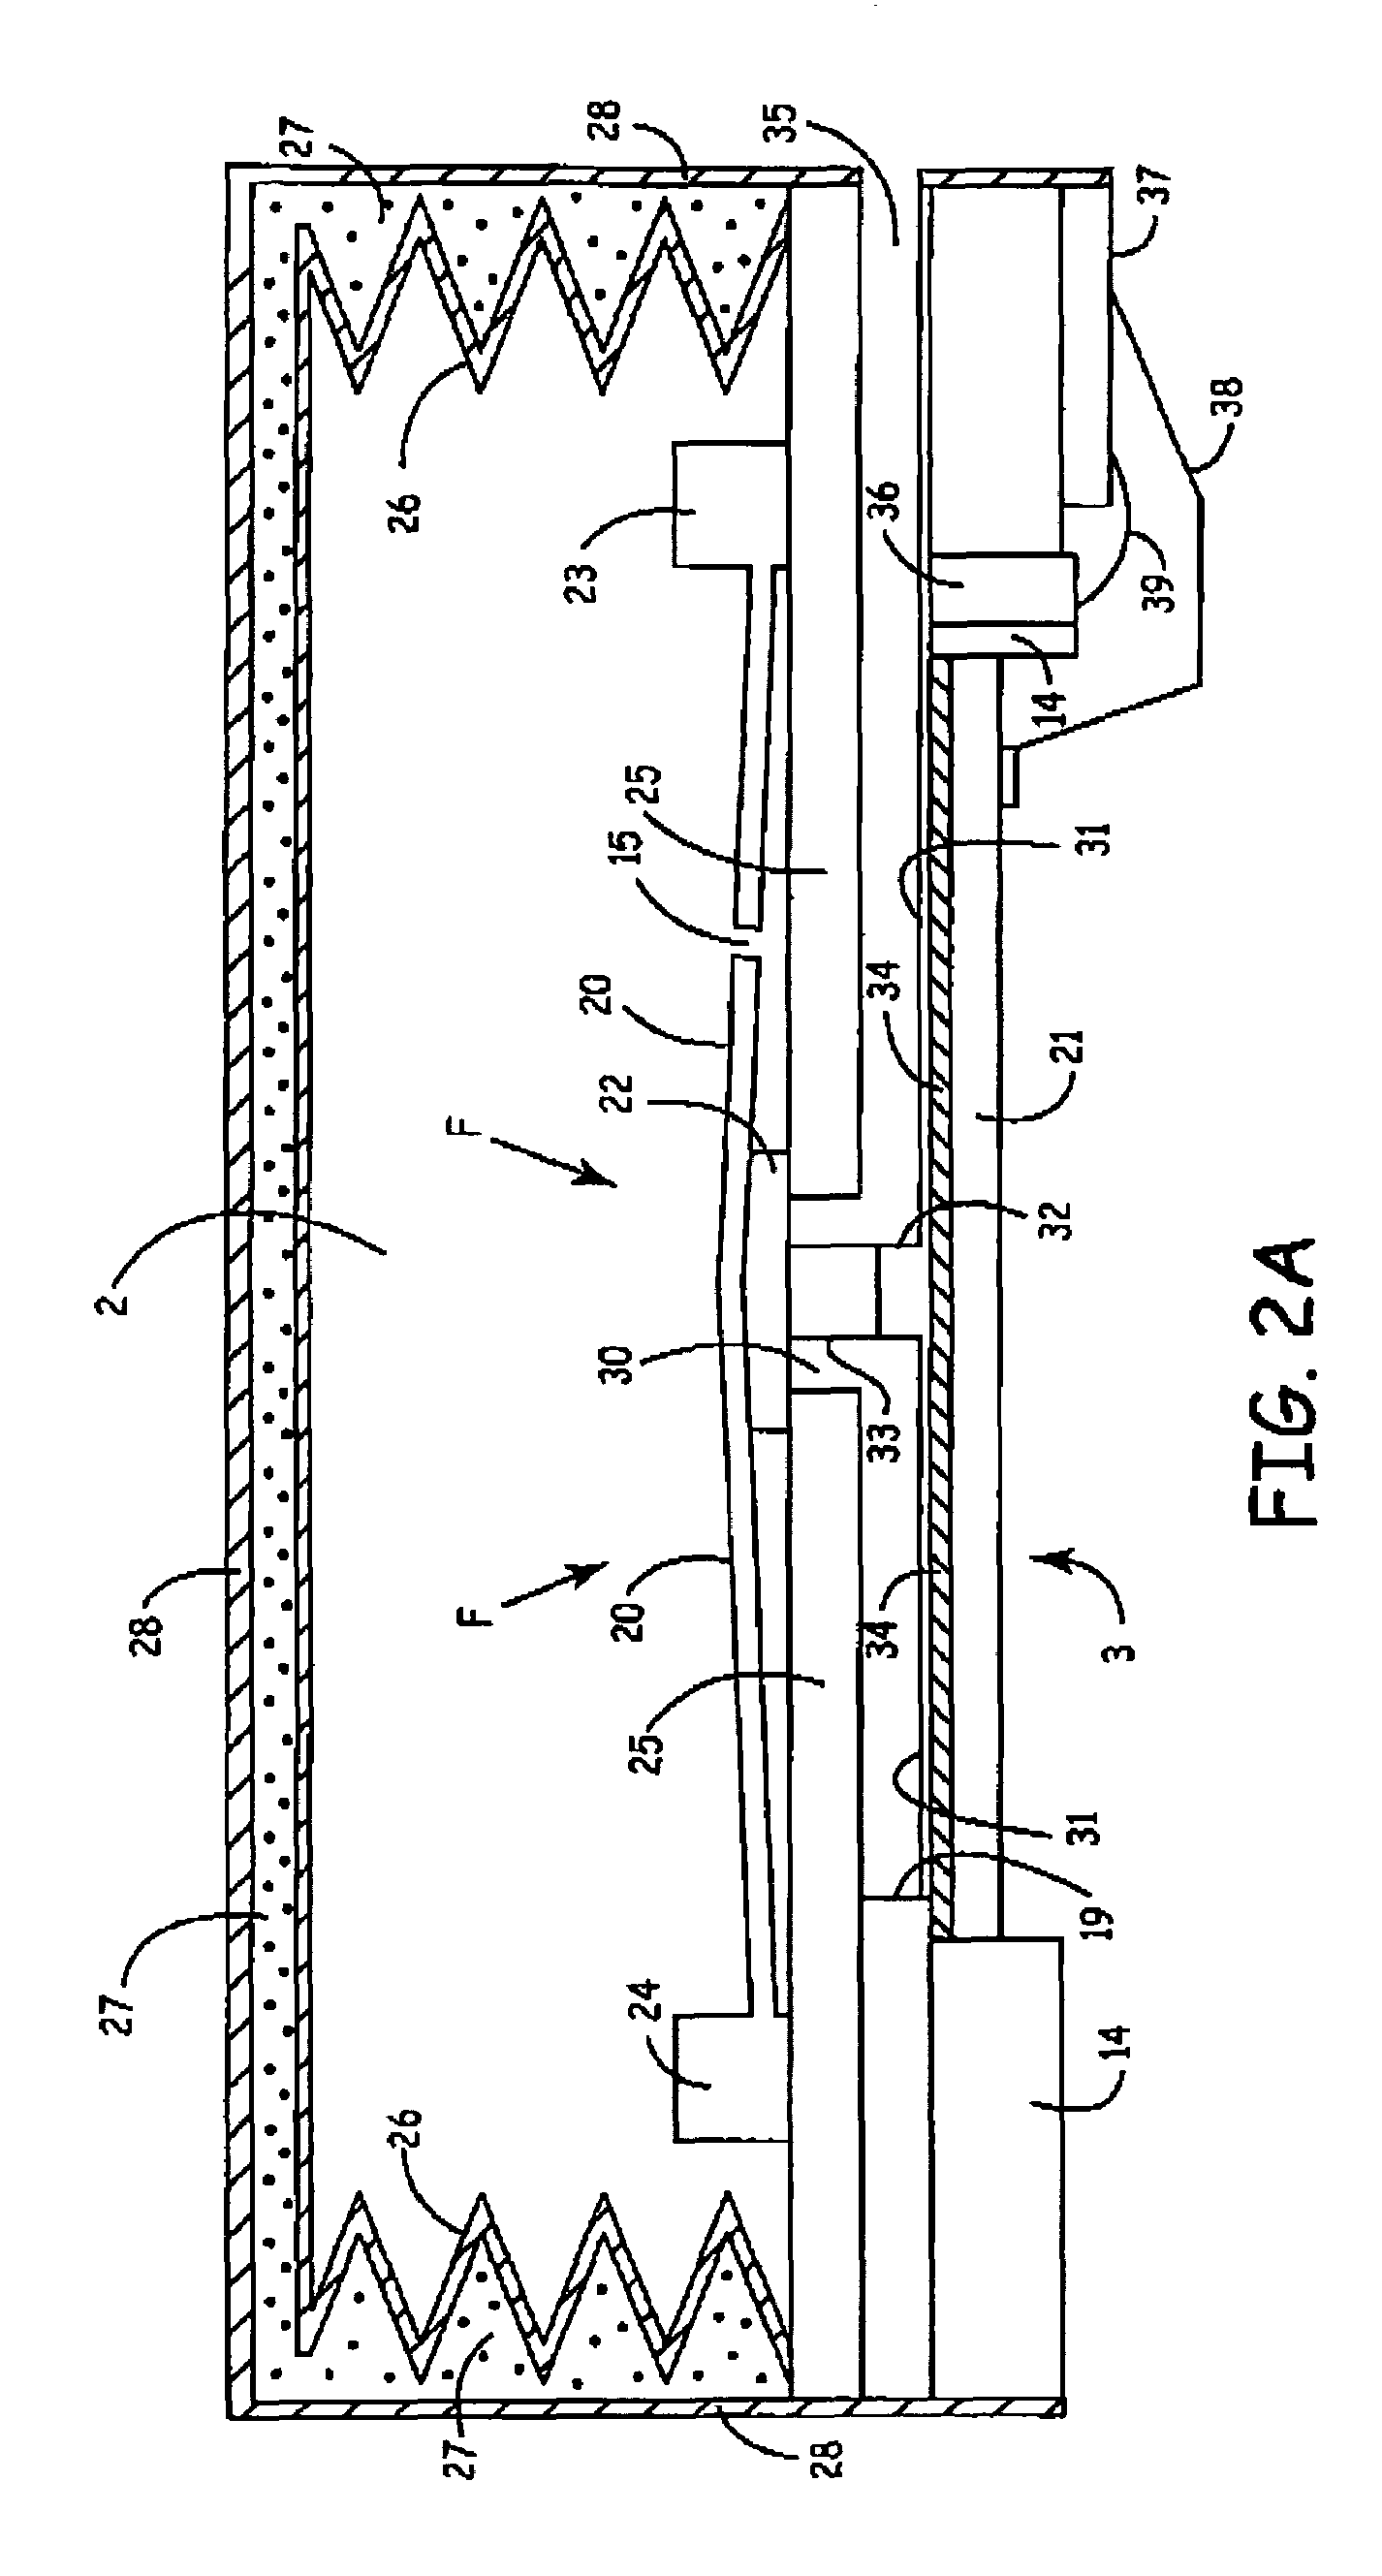 Drive circuit having improved energy efficiency for implantable beneficial agent infusion or delivery device